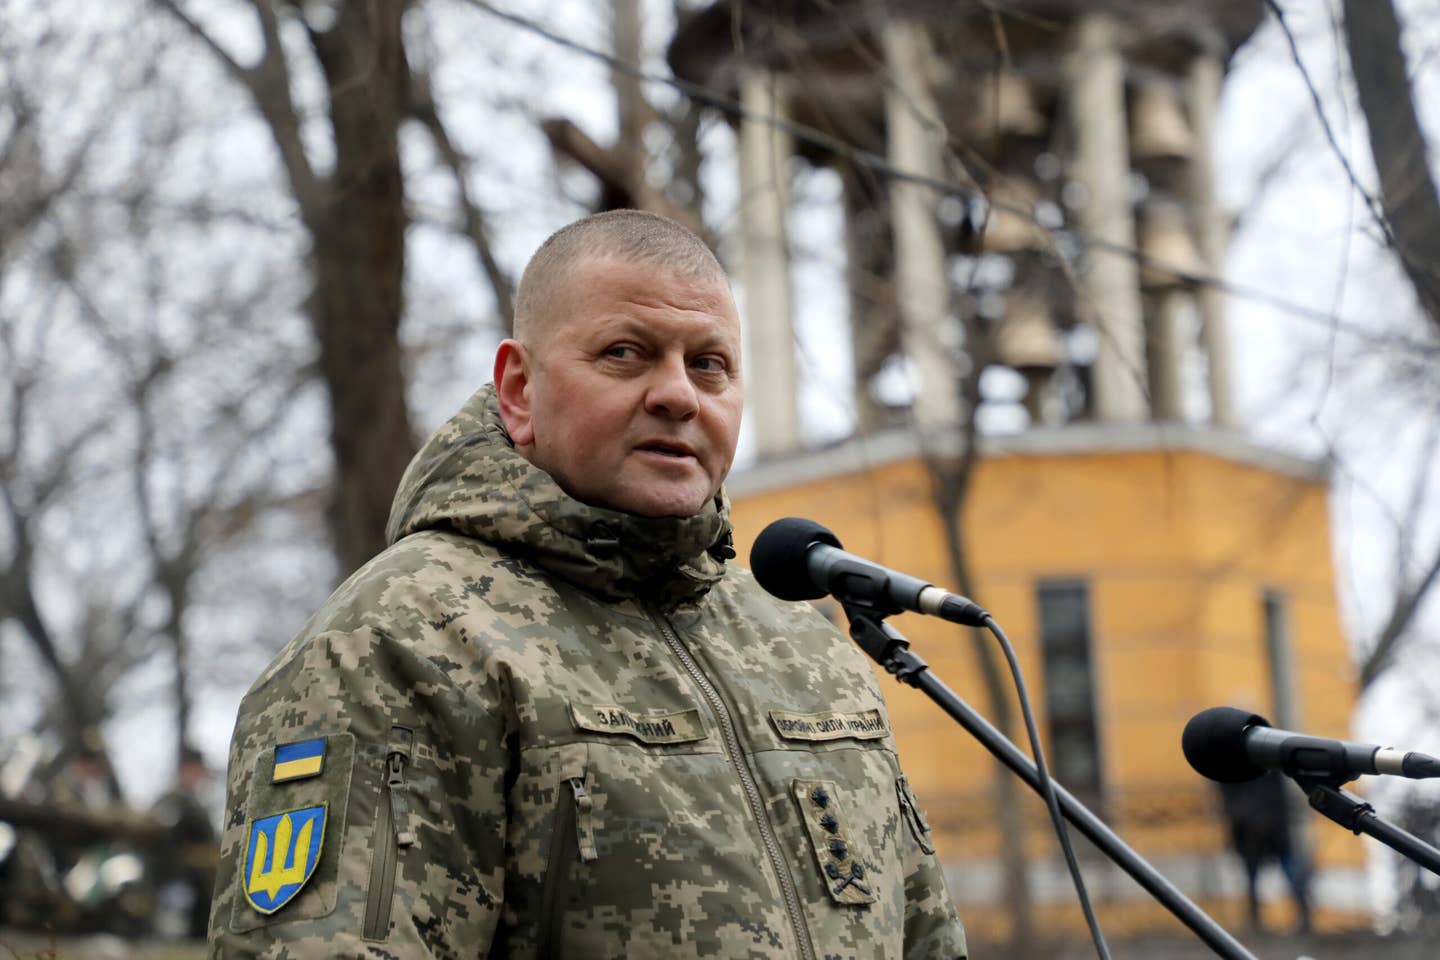 Commander-in-Chief of the Armed Forces of Ukraine Lt. Gen. Valerii Zaluzhnyi delivers a speech in Kyiv, immediately before the full-scale Russian invasion of Ukraine. <em>Yuliia Ovsiannikova / Ukrinform/Future Publishing via Getty Images</em>